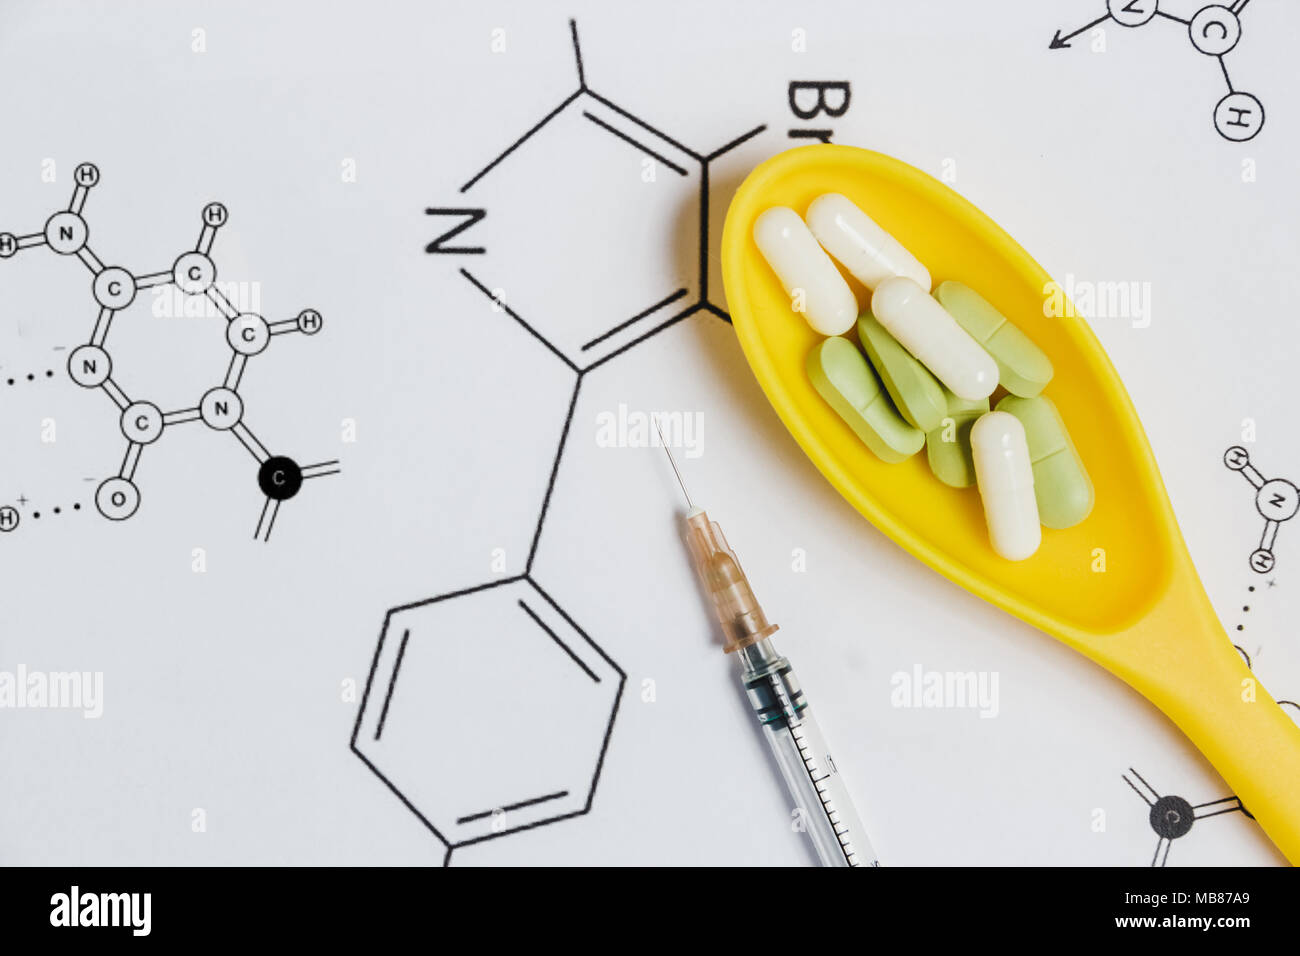 Assortment of Pills, Tablets and Capsules in Yellow Spoon, Syringe on White Background with Chemical Formula. Stock Photo